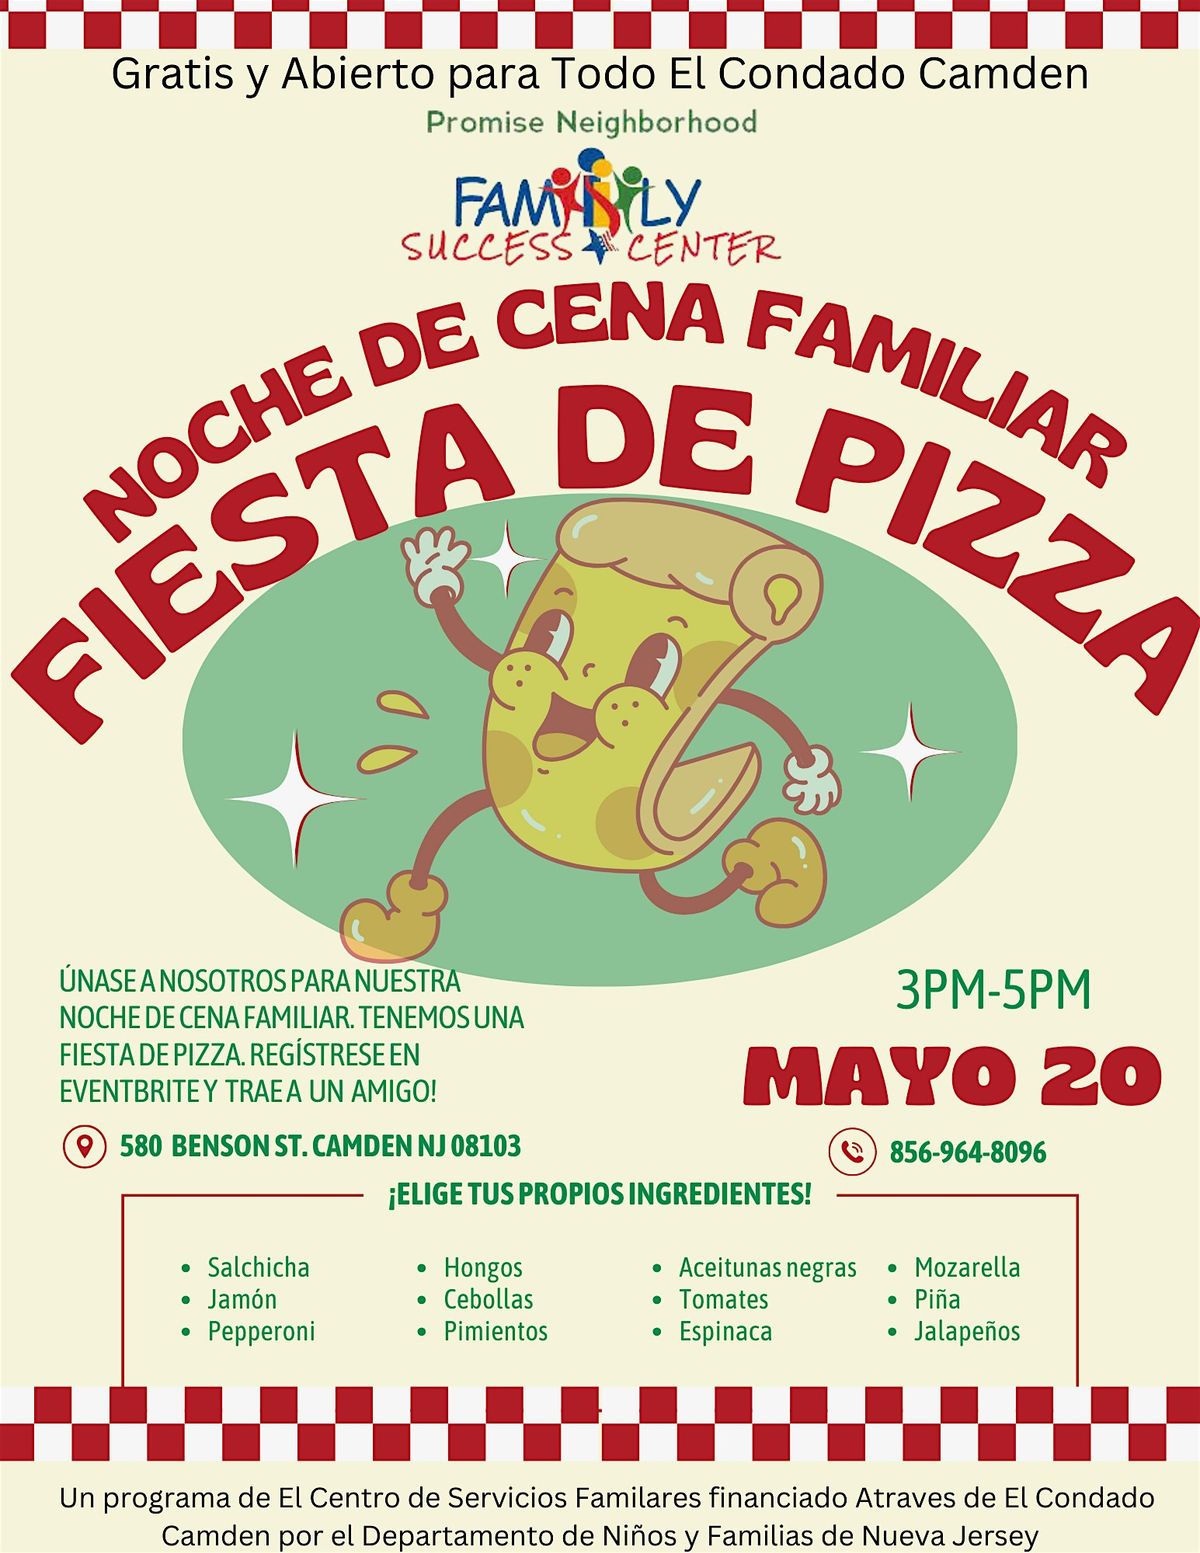 Come eat pizza and have fun!